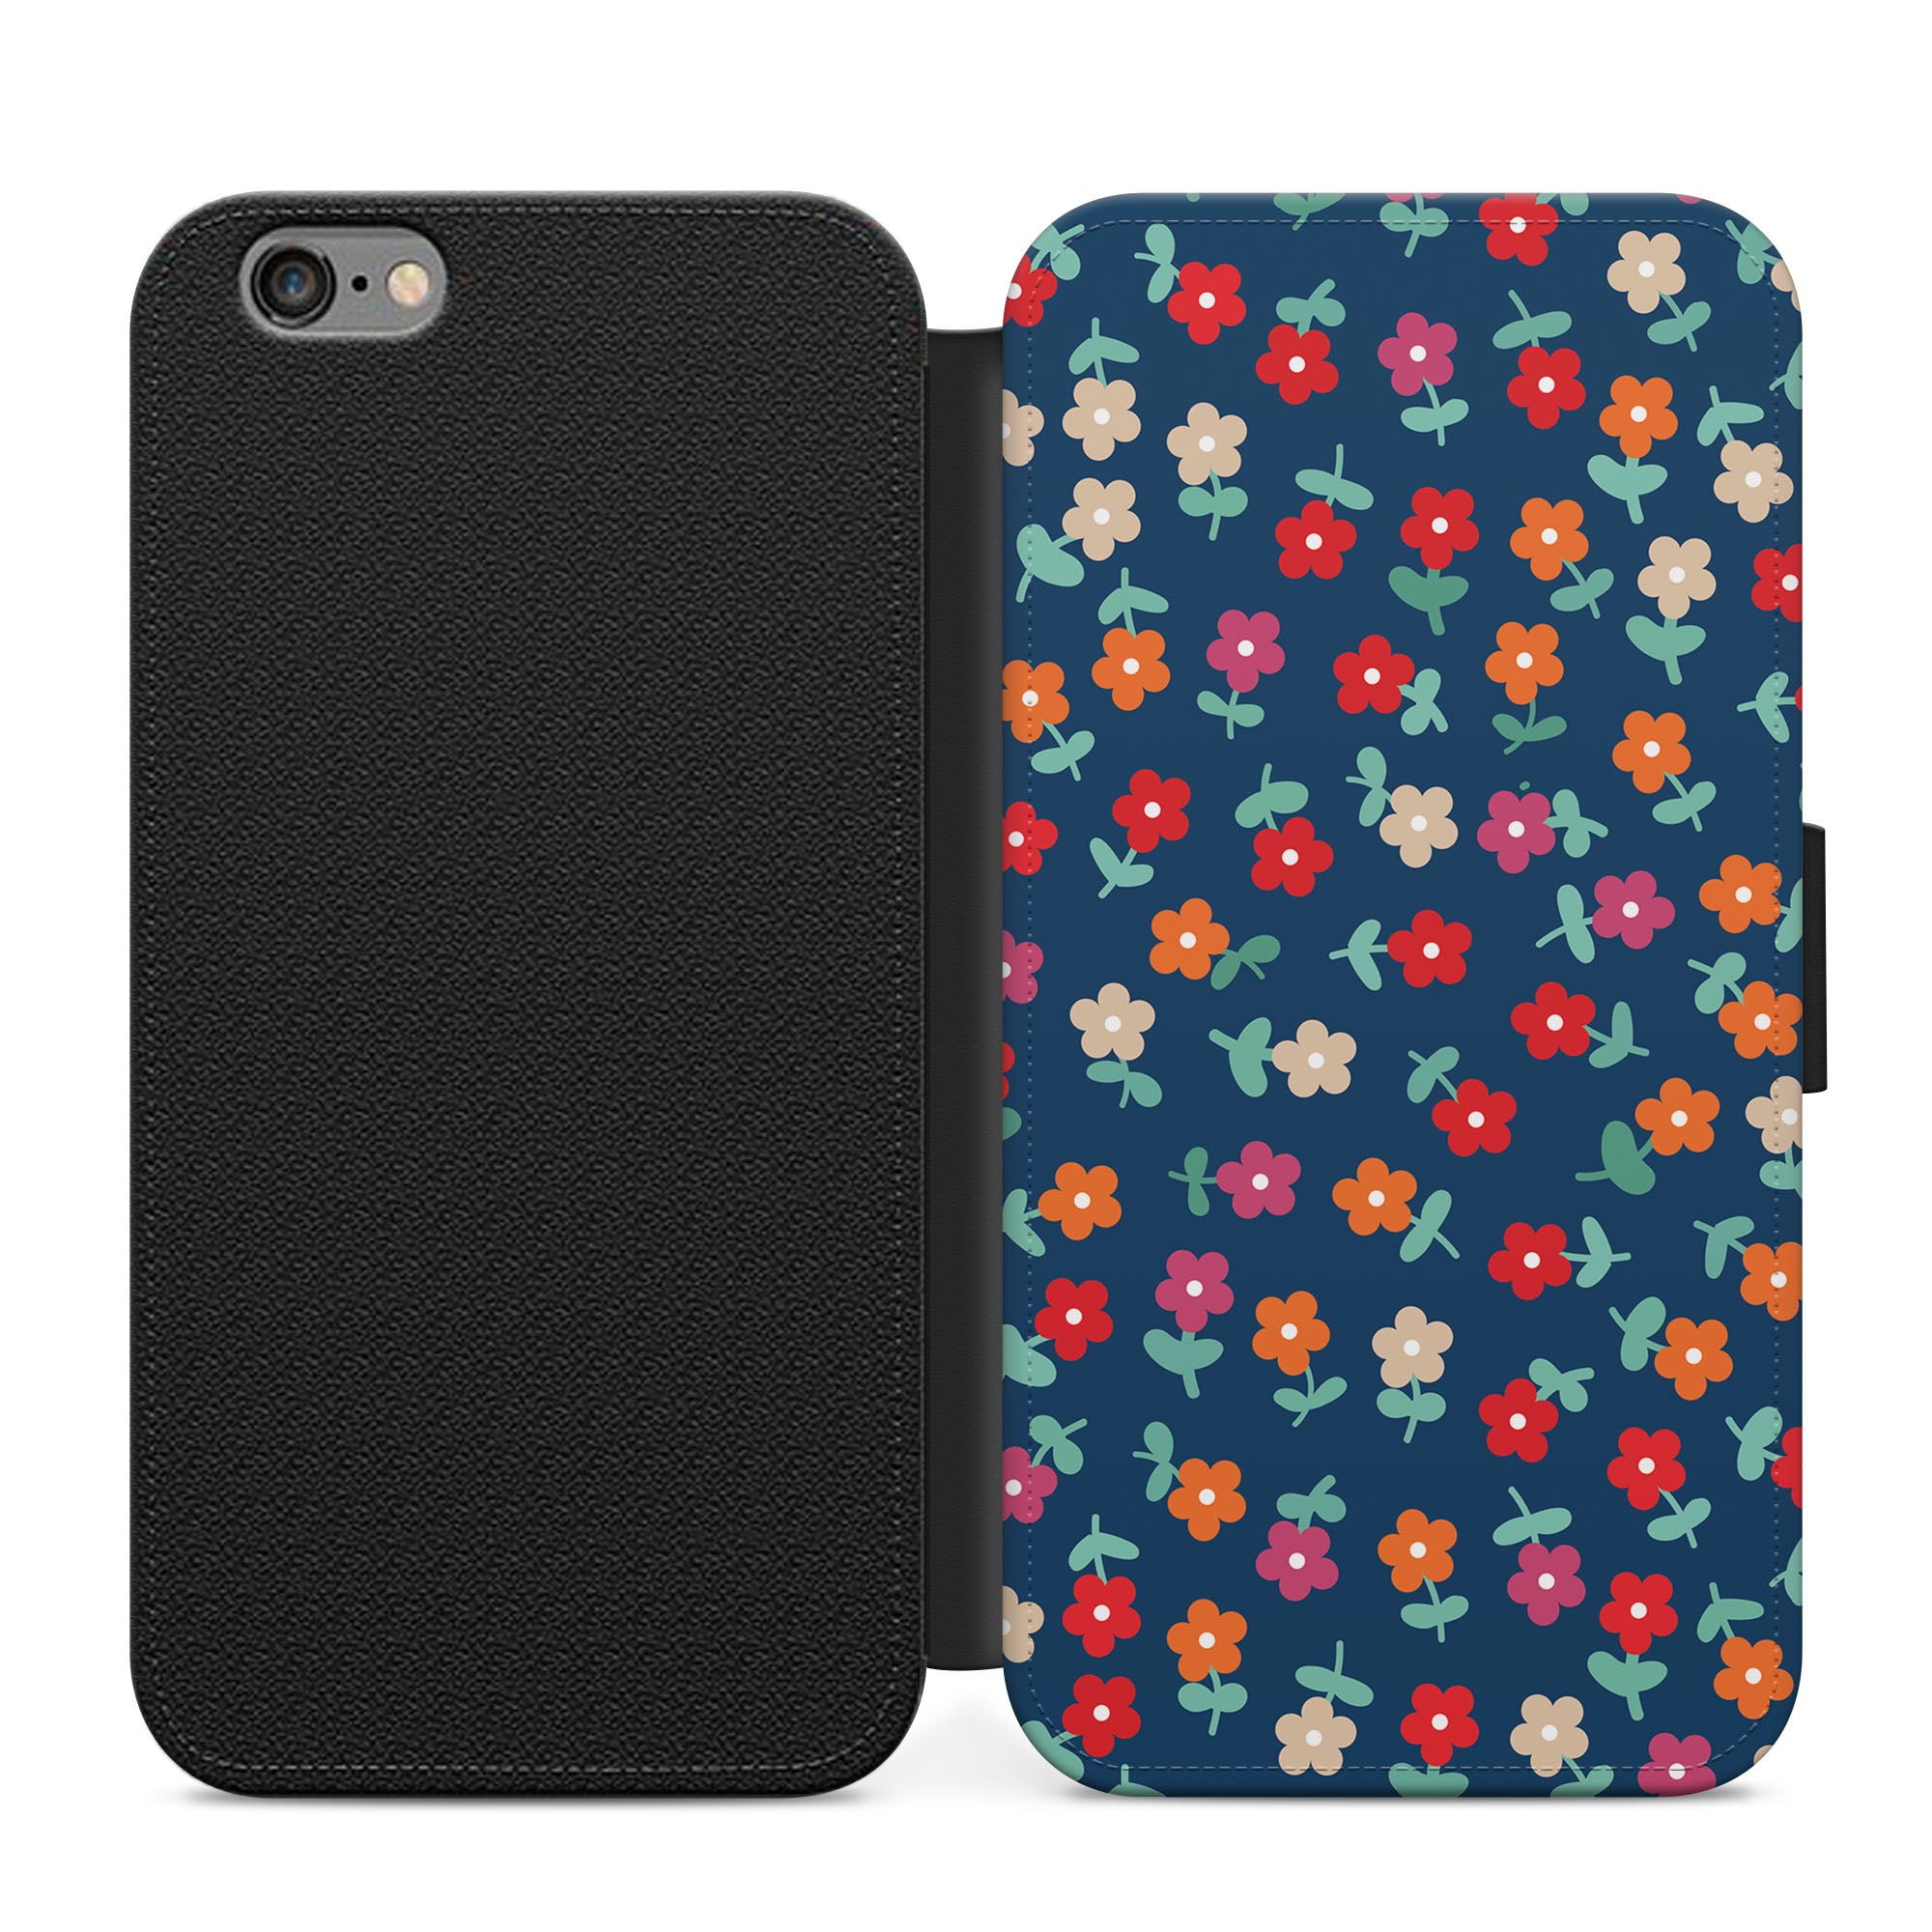 Navy Blue Floral Pattern Faux Leather Flip Case Wallet for iPhone / Samsung